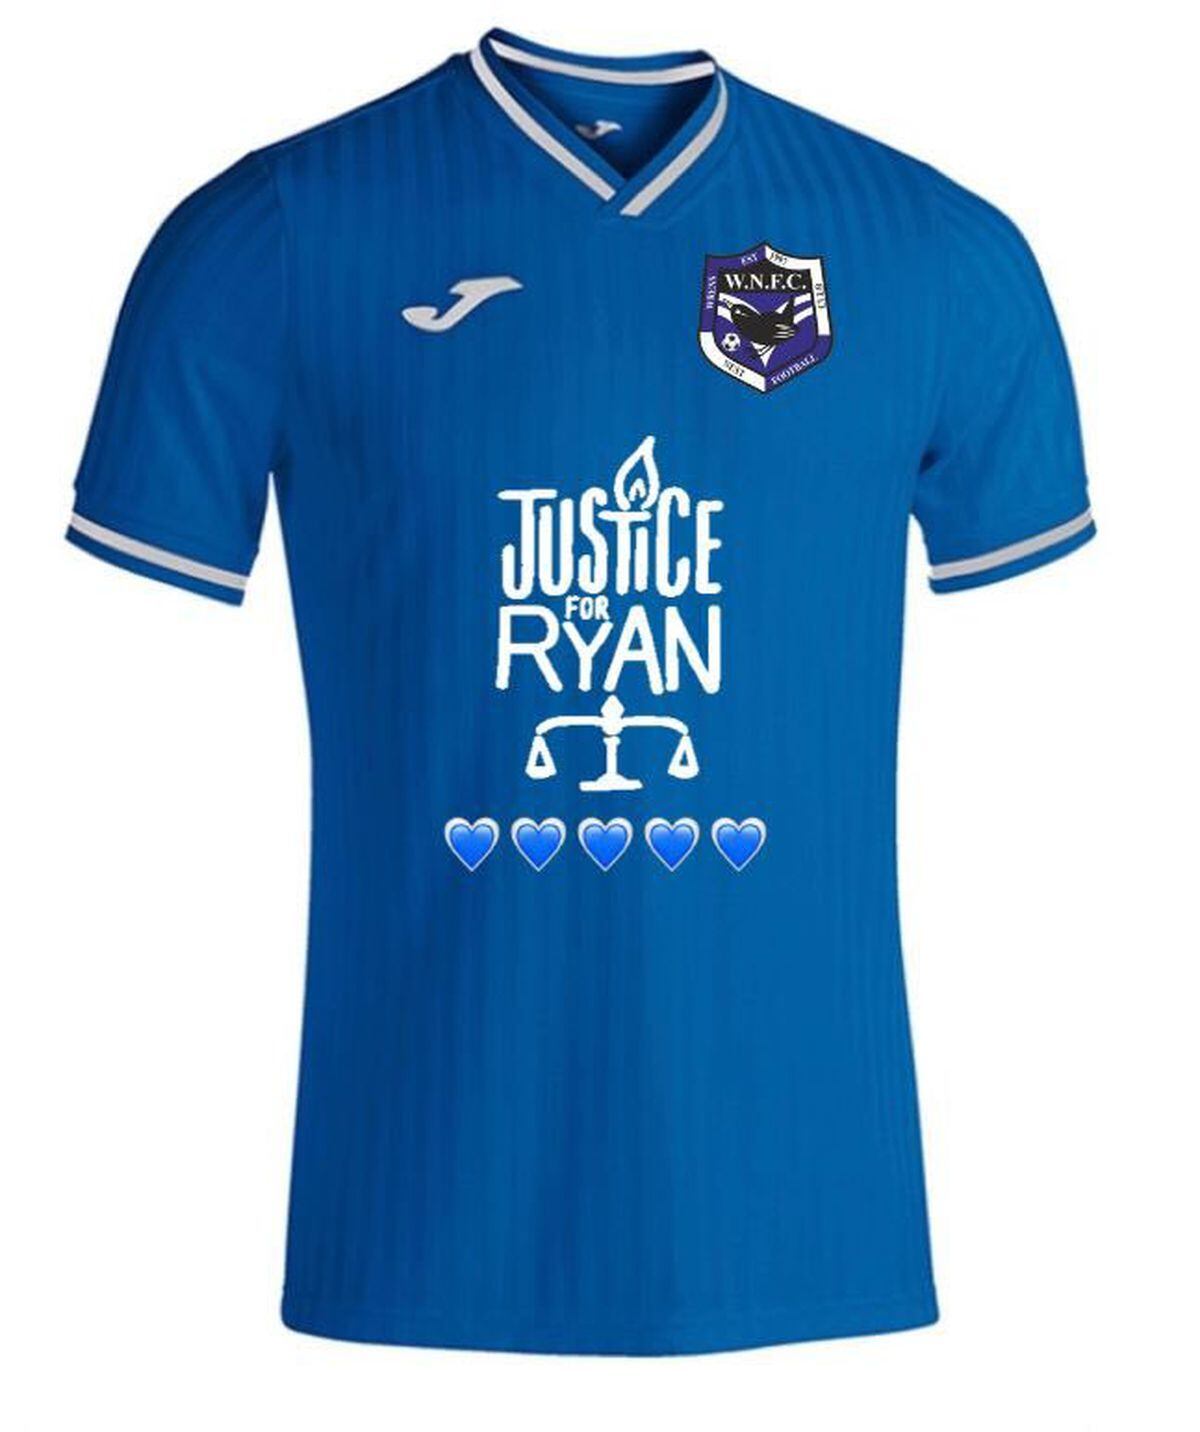 The new Wrens Nest away kit featuring the Justice For Ryan logo